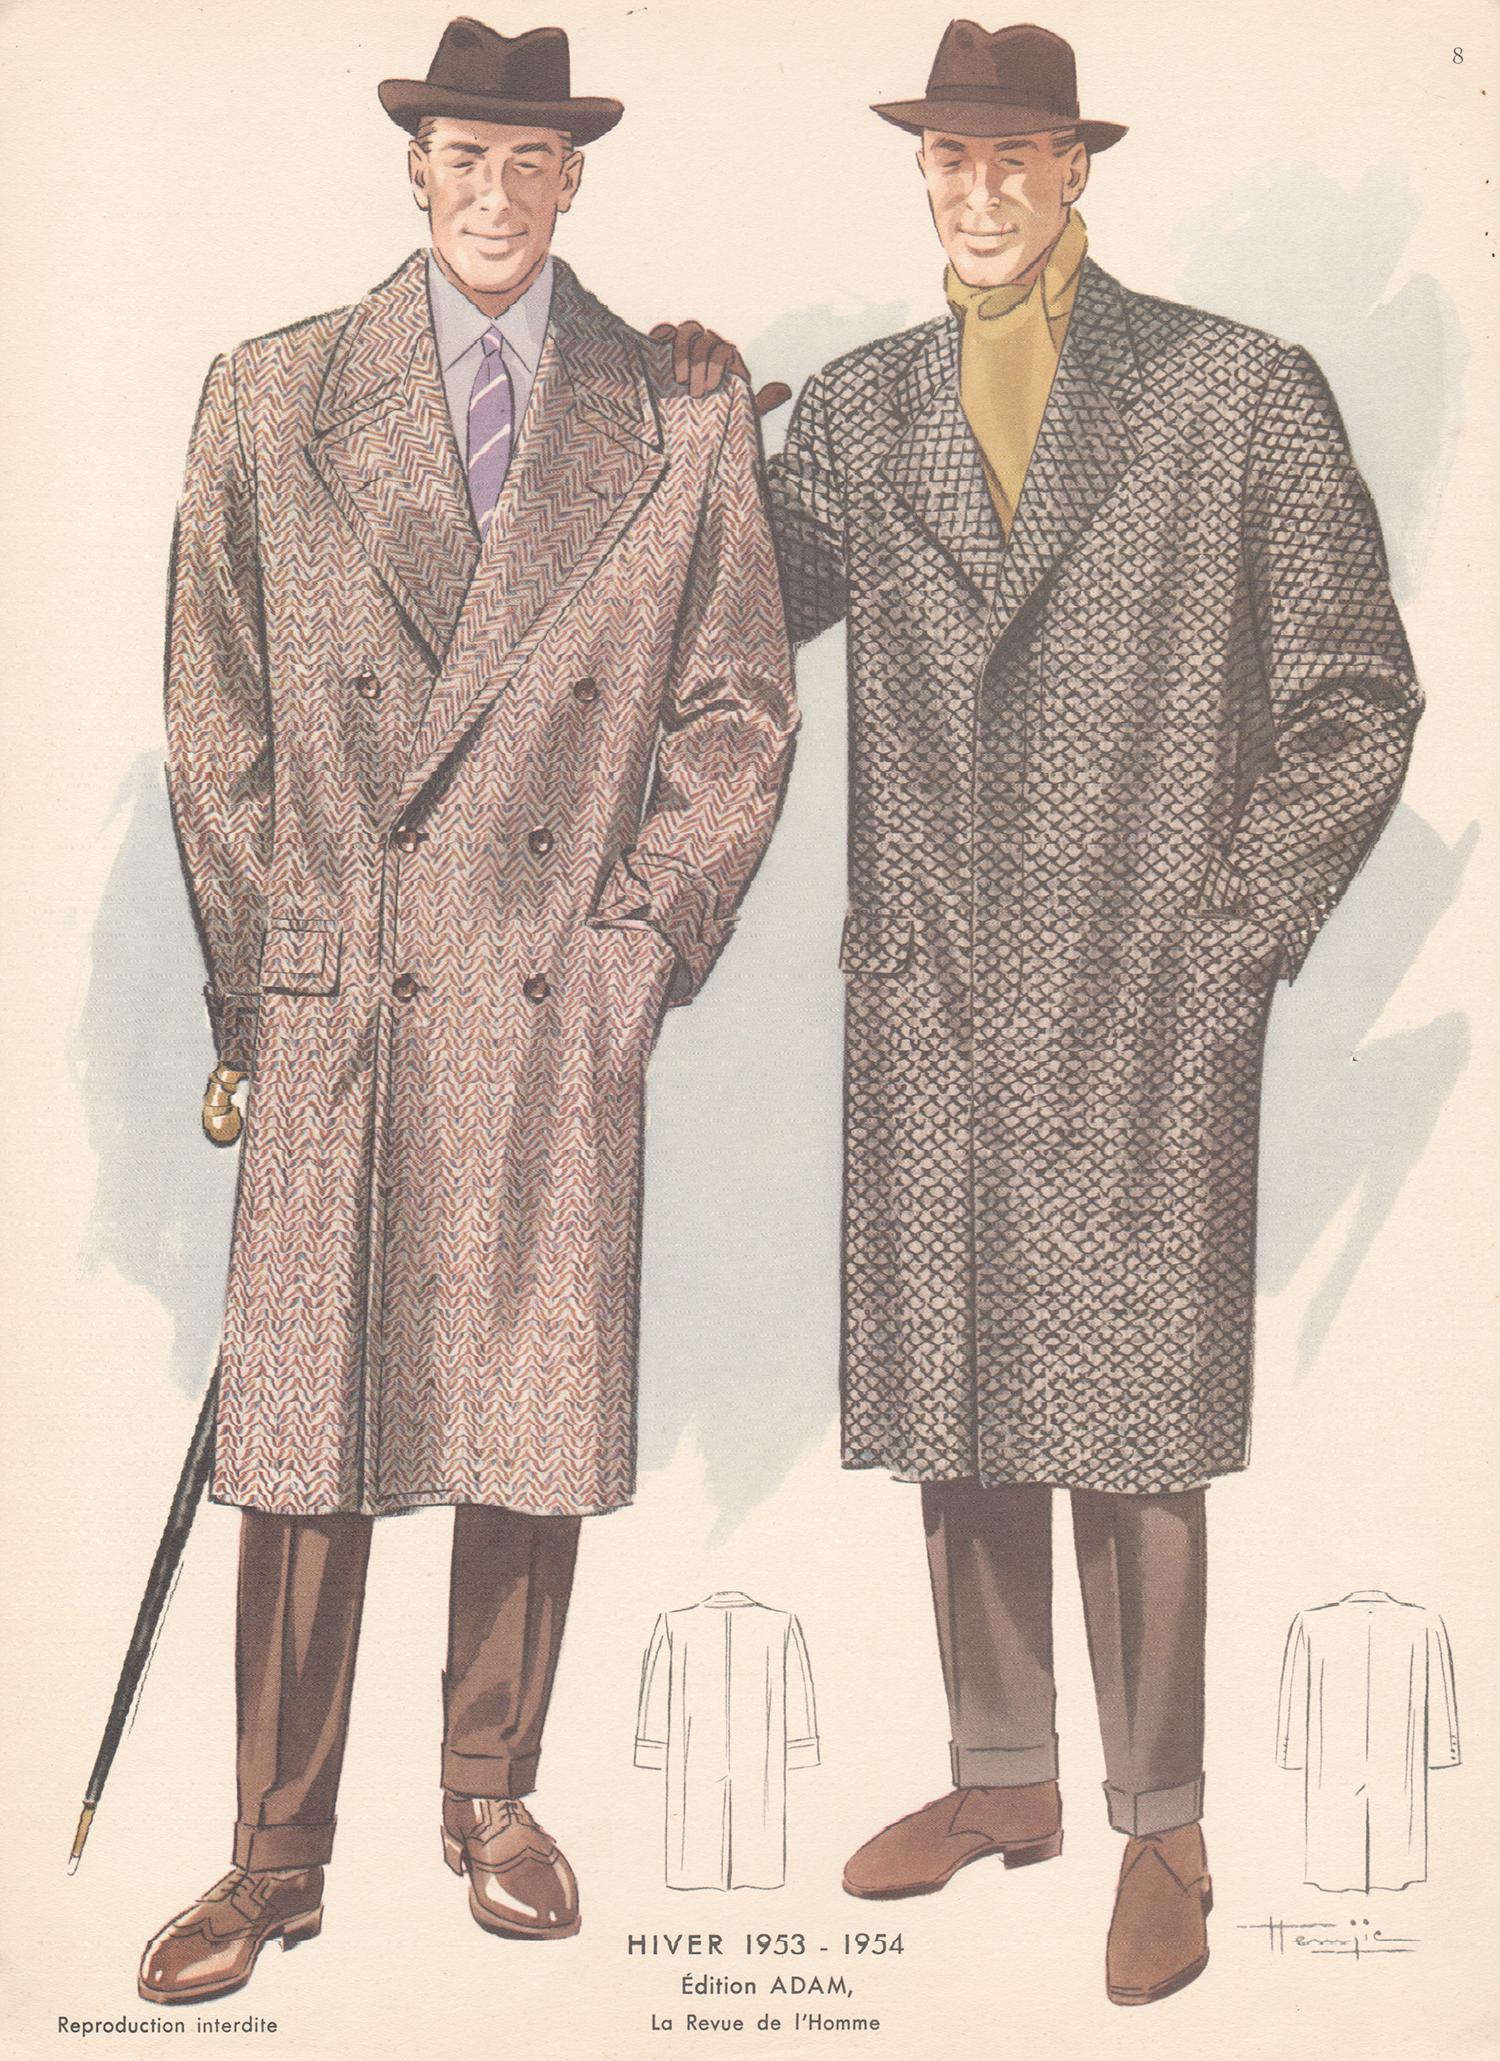 What guys wore in the 50s?